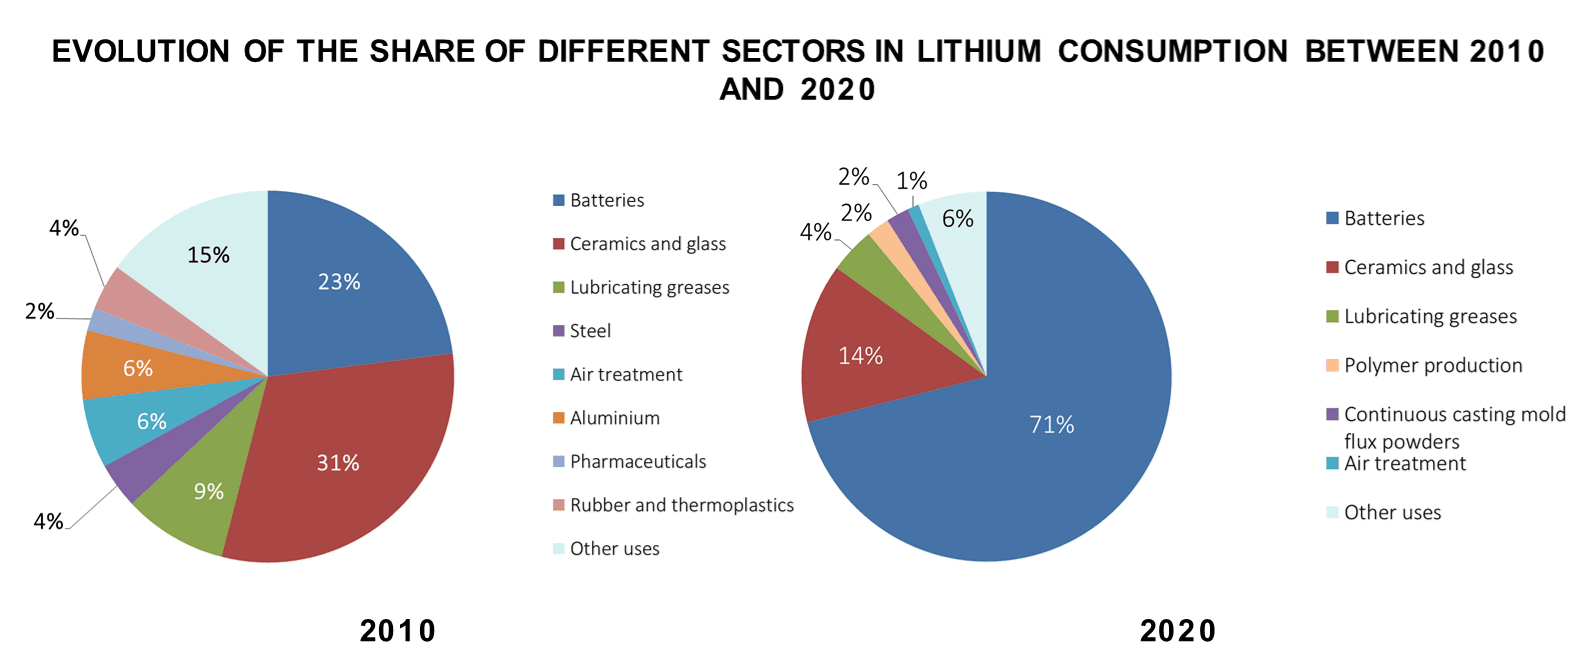 Evolution of the share of different sectors in lithium consumption between 2010 and 2019